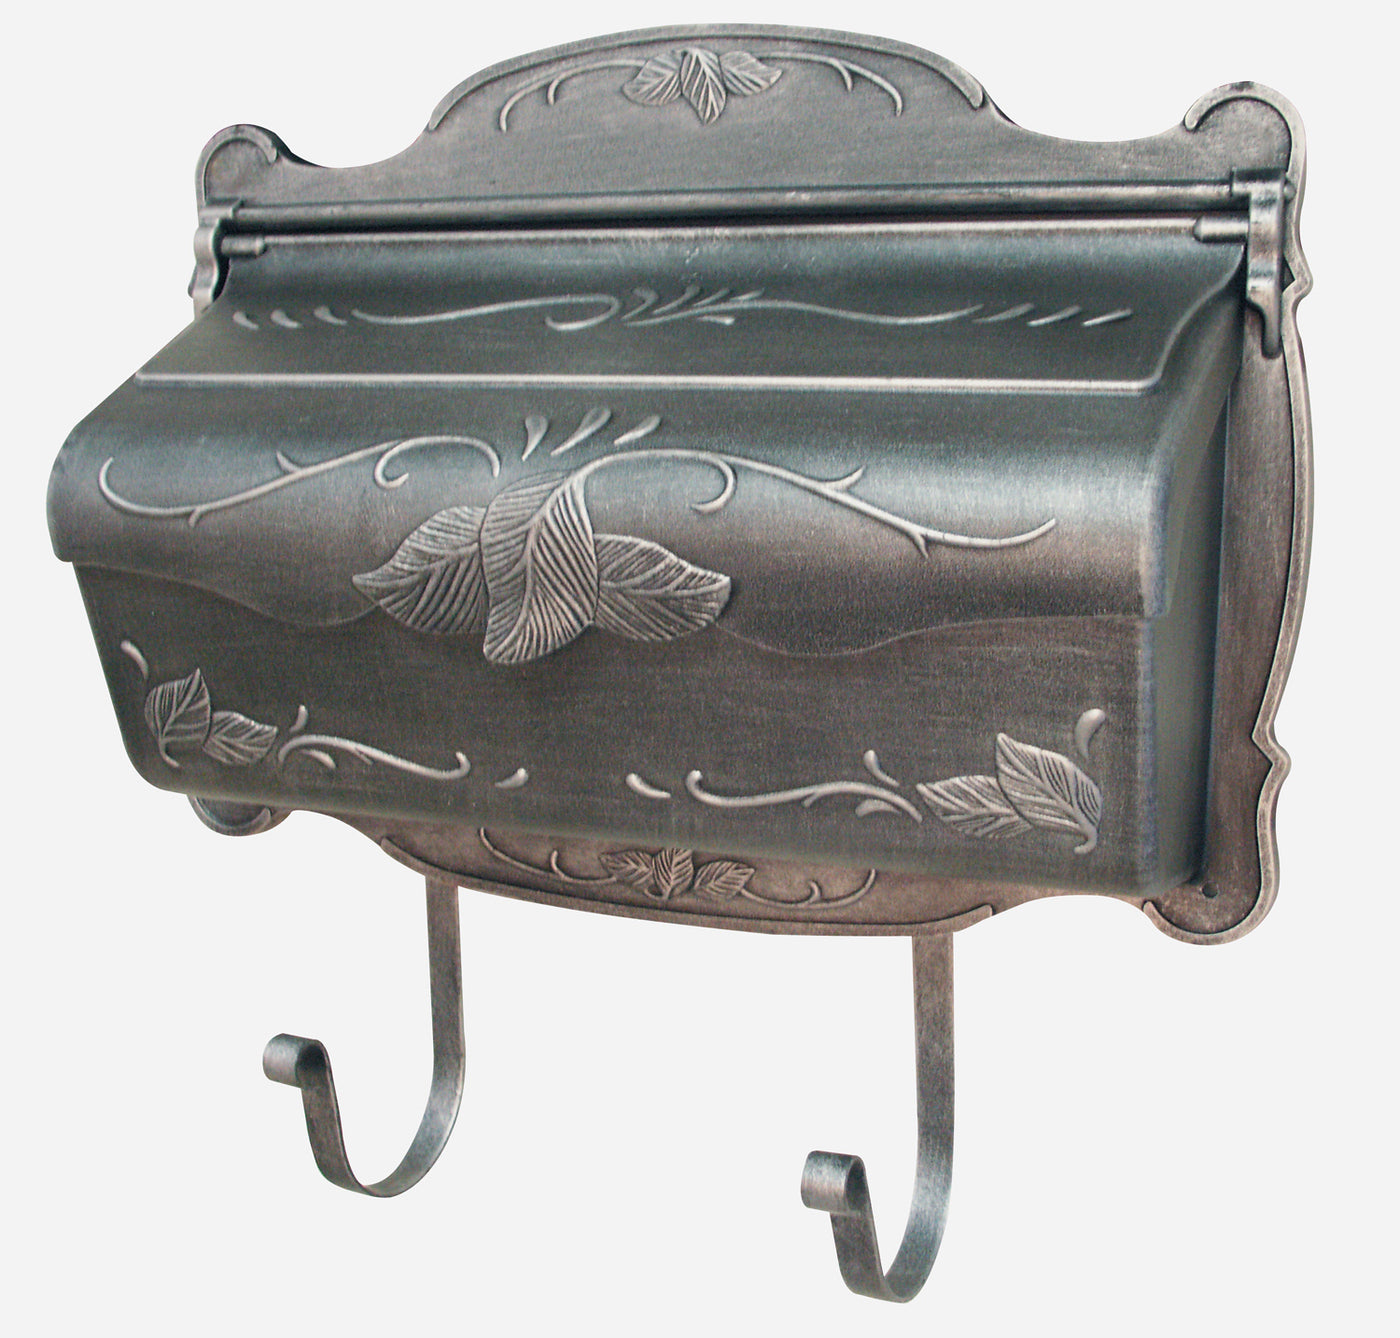 SHF-1001-SW Floral Horizontal Mailbox Wall Mount Aluminum Detailed Decorative Flower